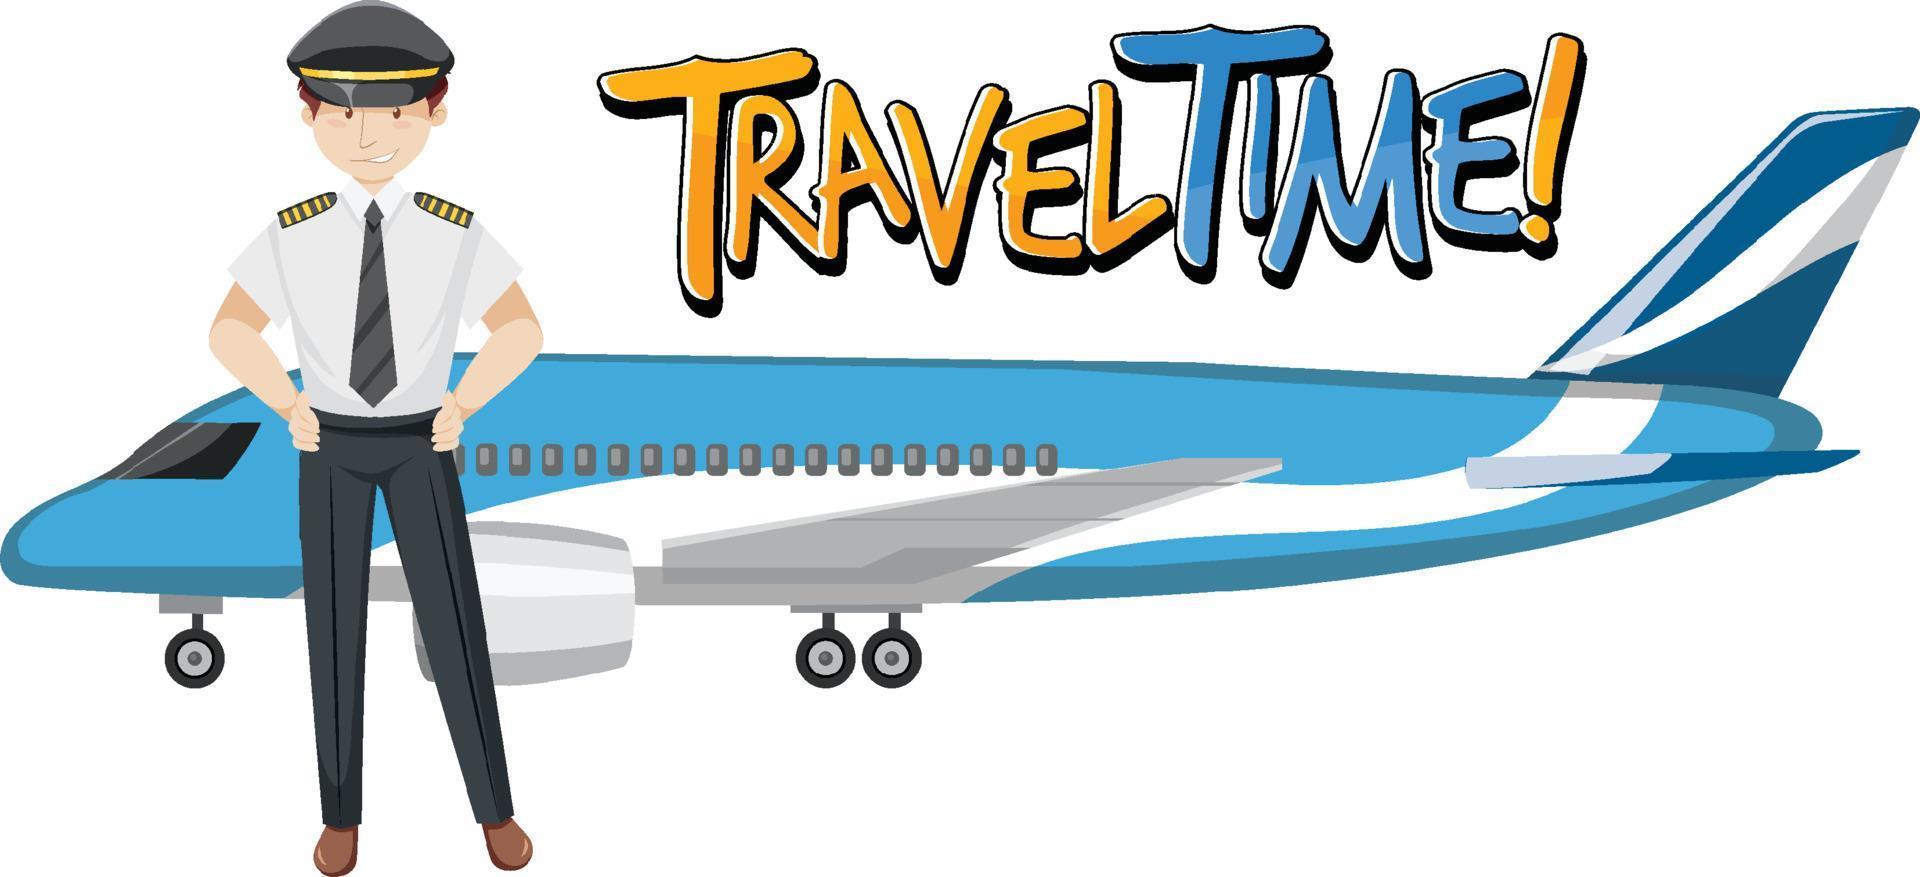 Travel Time typography design with a pilot in cartoon style vector